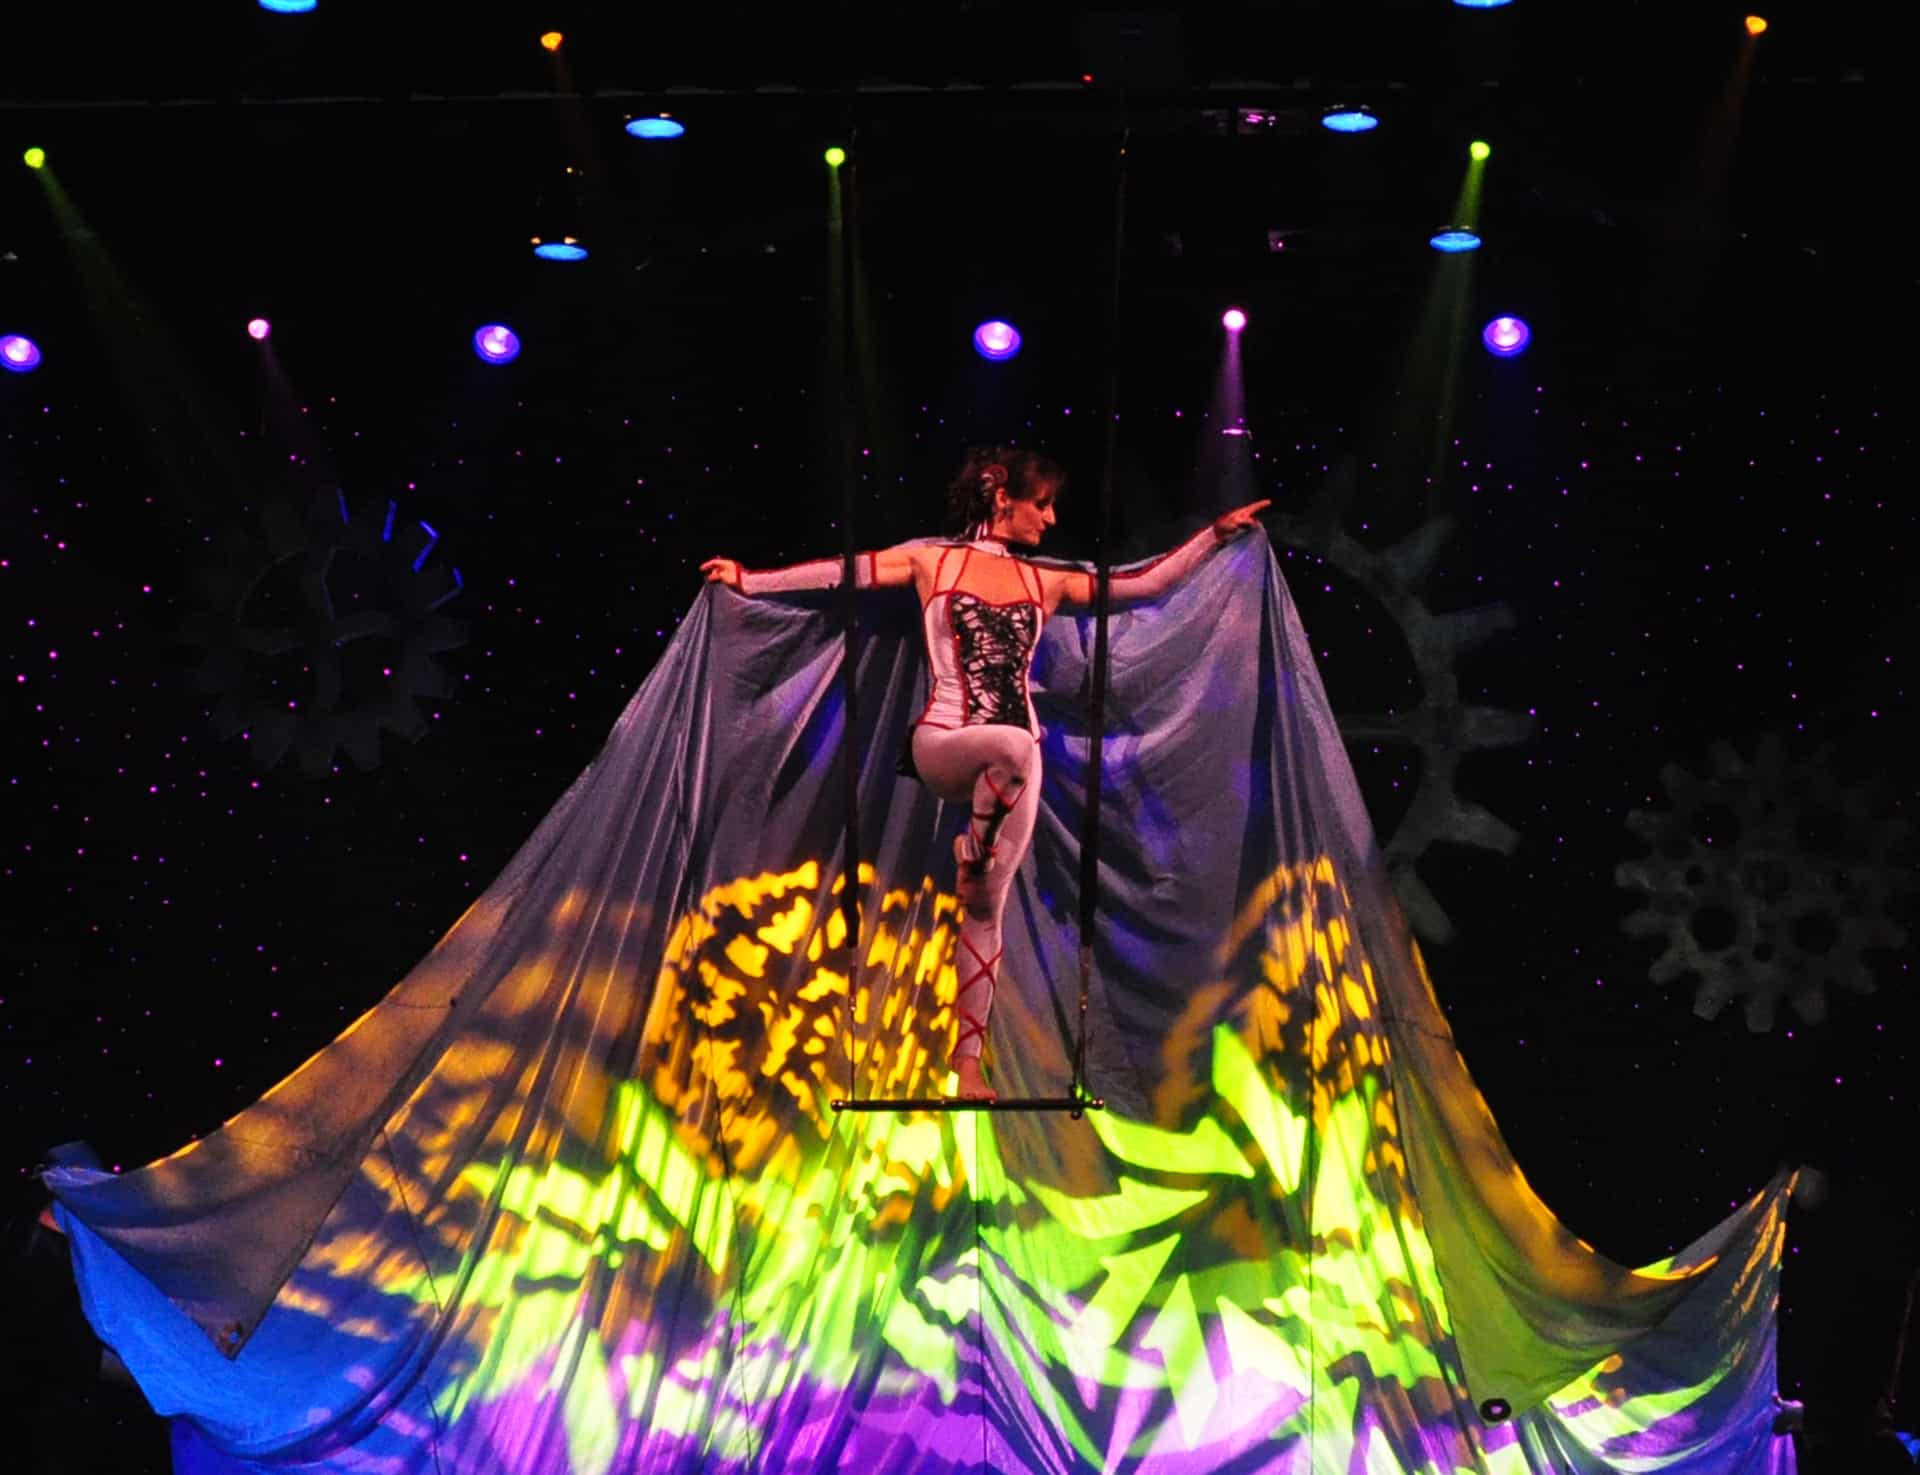 Thin woman standing on a trapeze bar spreading a large colorful cape flowing  behind her